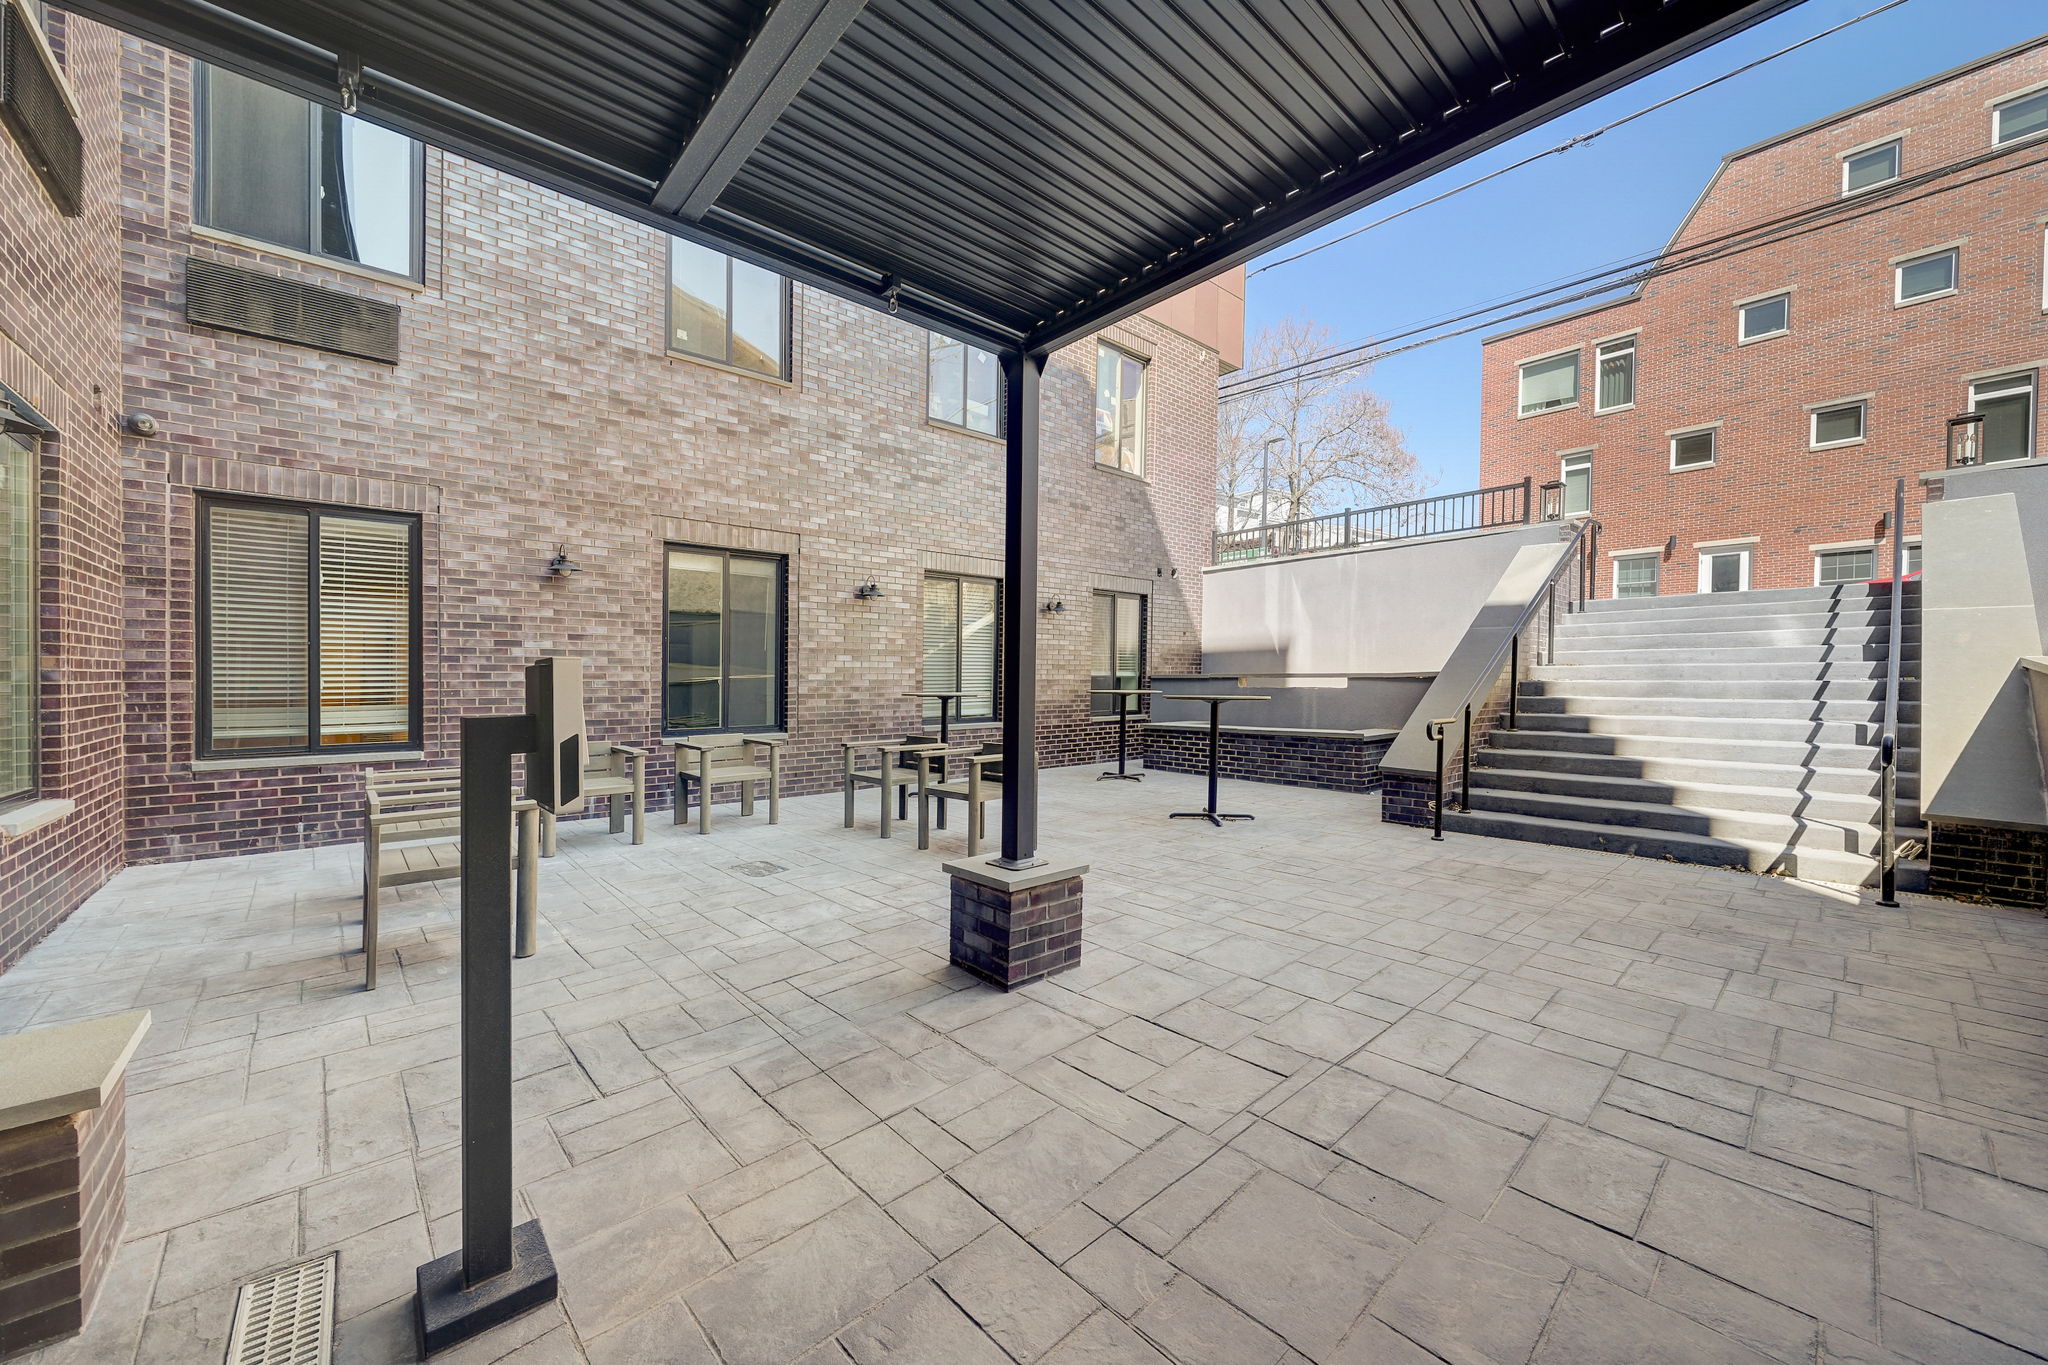 Mitchell St Gym, Common Area, Roof Deck, Exterior-004